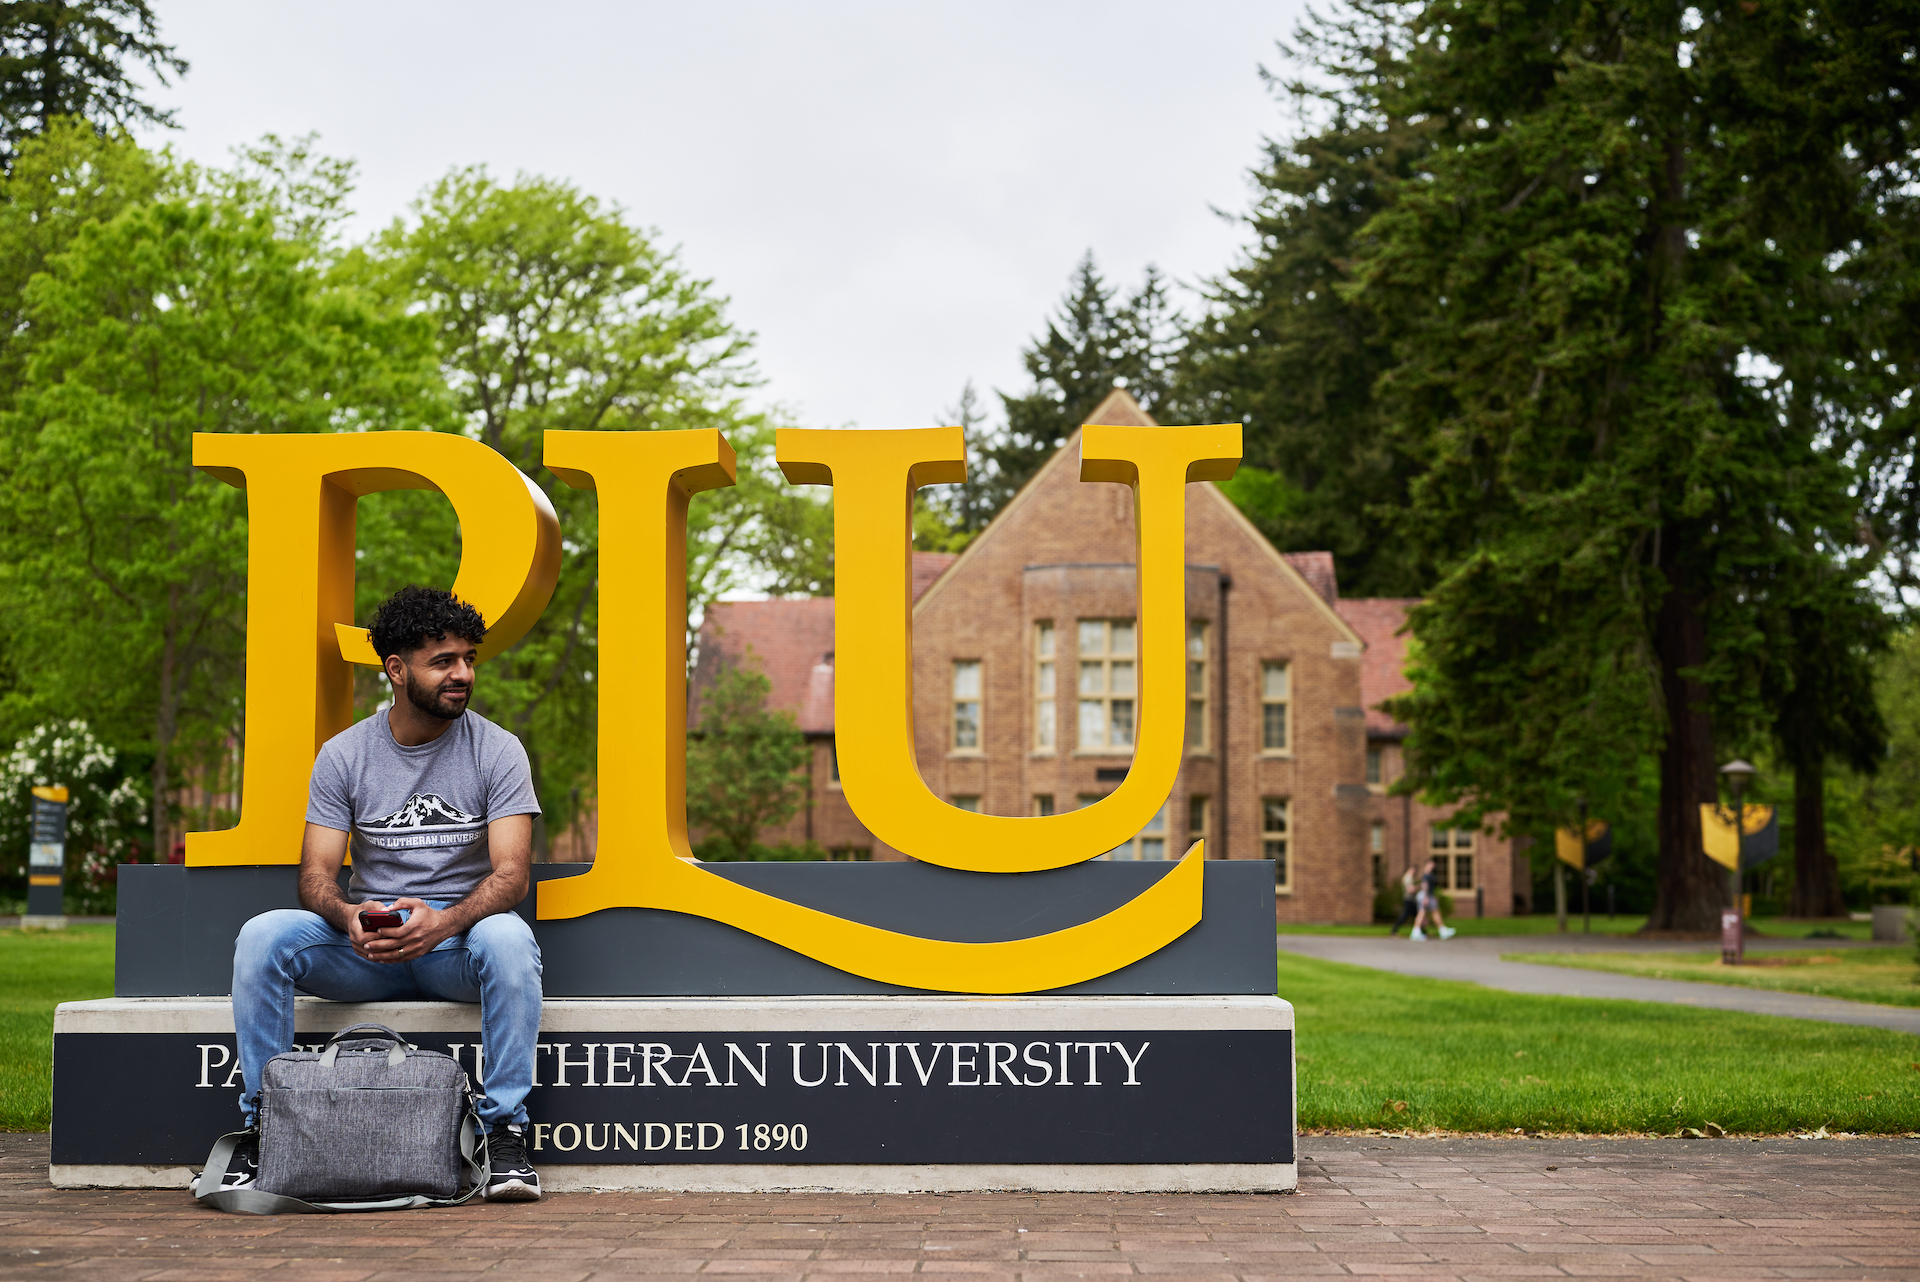 A student sits in front of a yellow PLU sign in front of a brick building surrounded by trees.